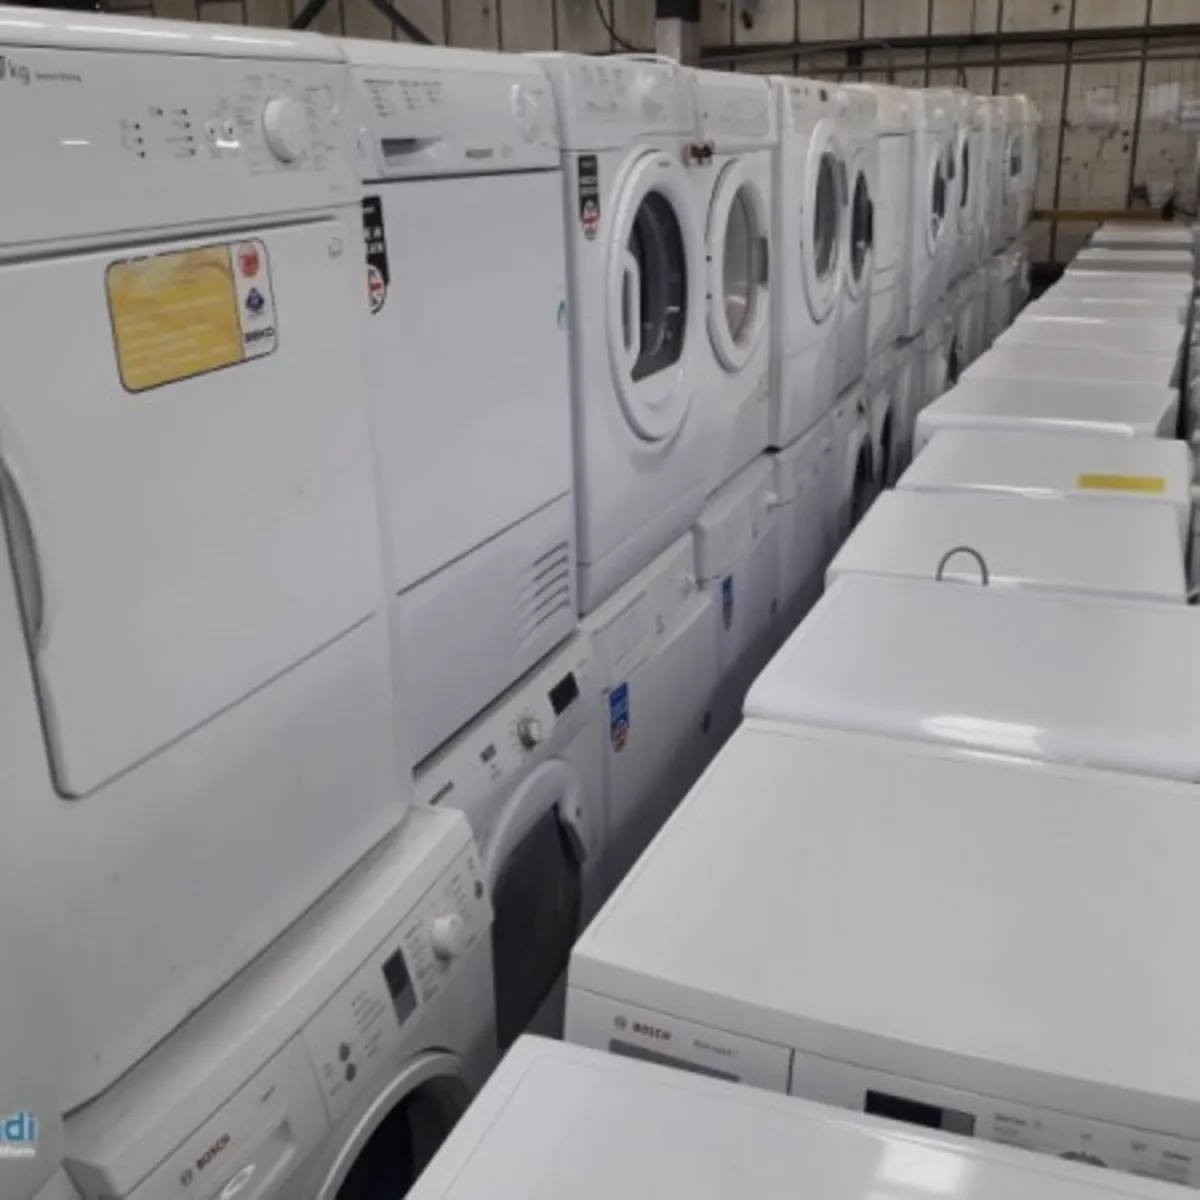 ⭐️ ⭐️⭐️⭐️⭐️ Recon cookers, dryers, washing machine